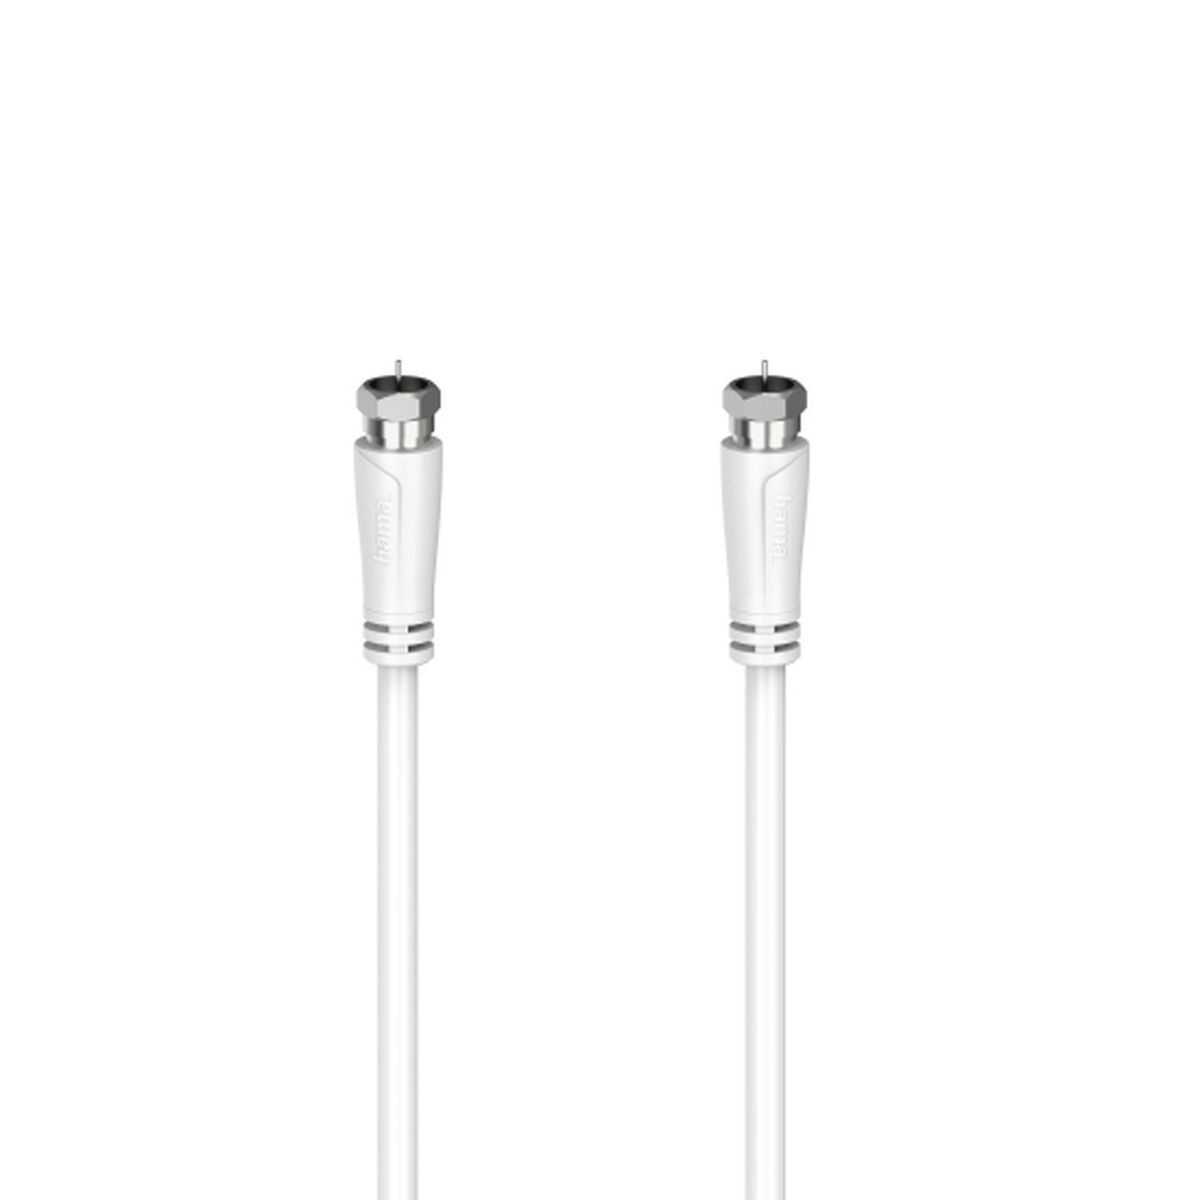 Coaxial TV Antenna Cable Hama 1,5 m White